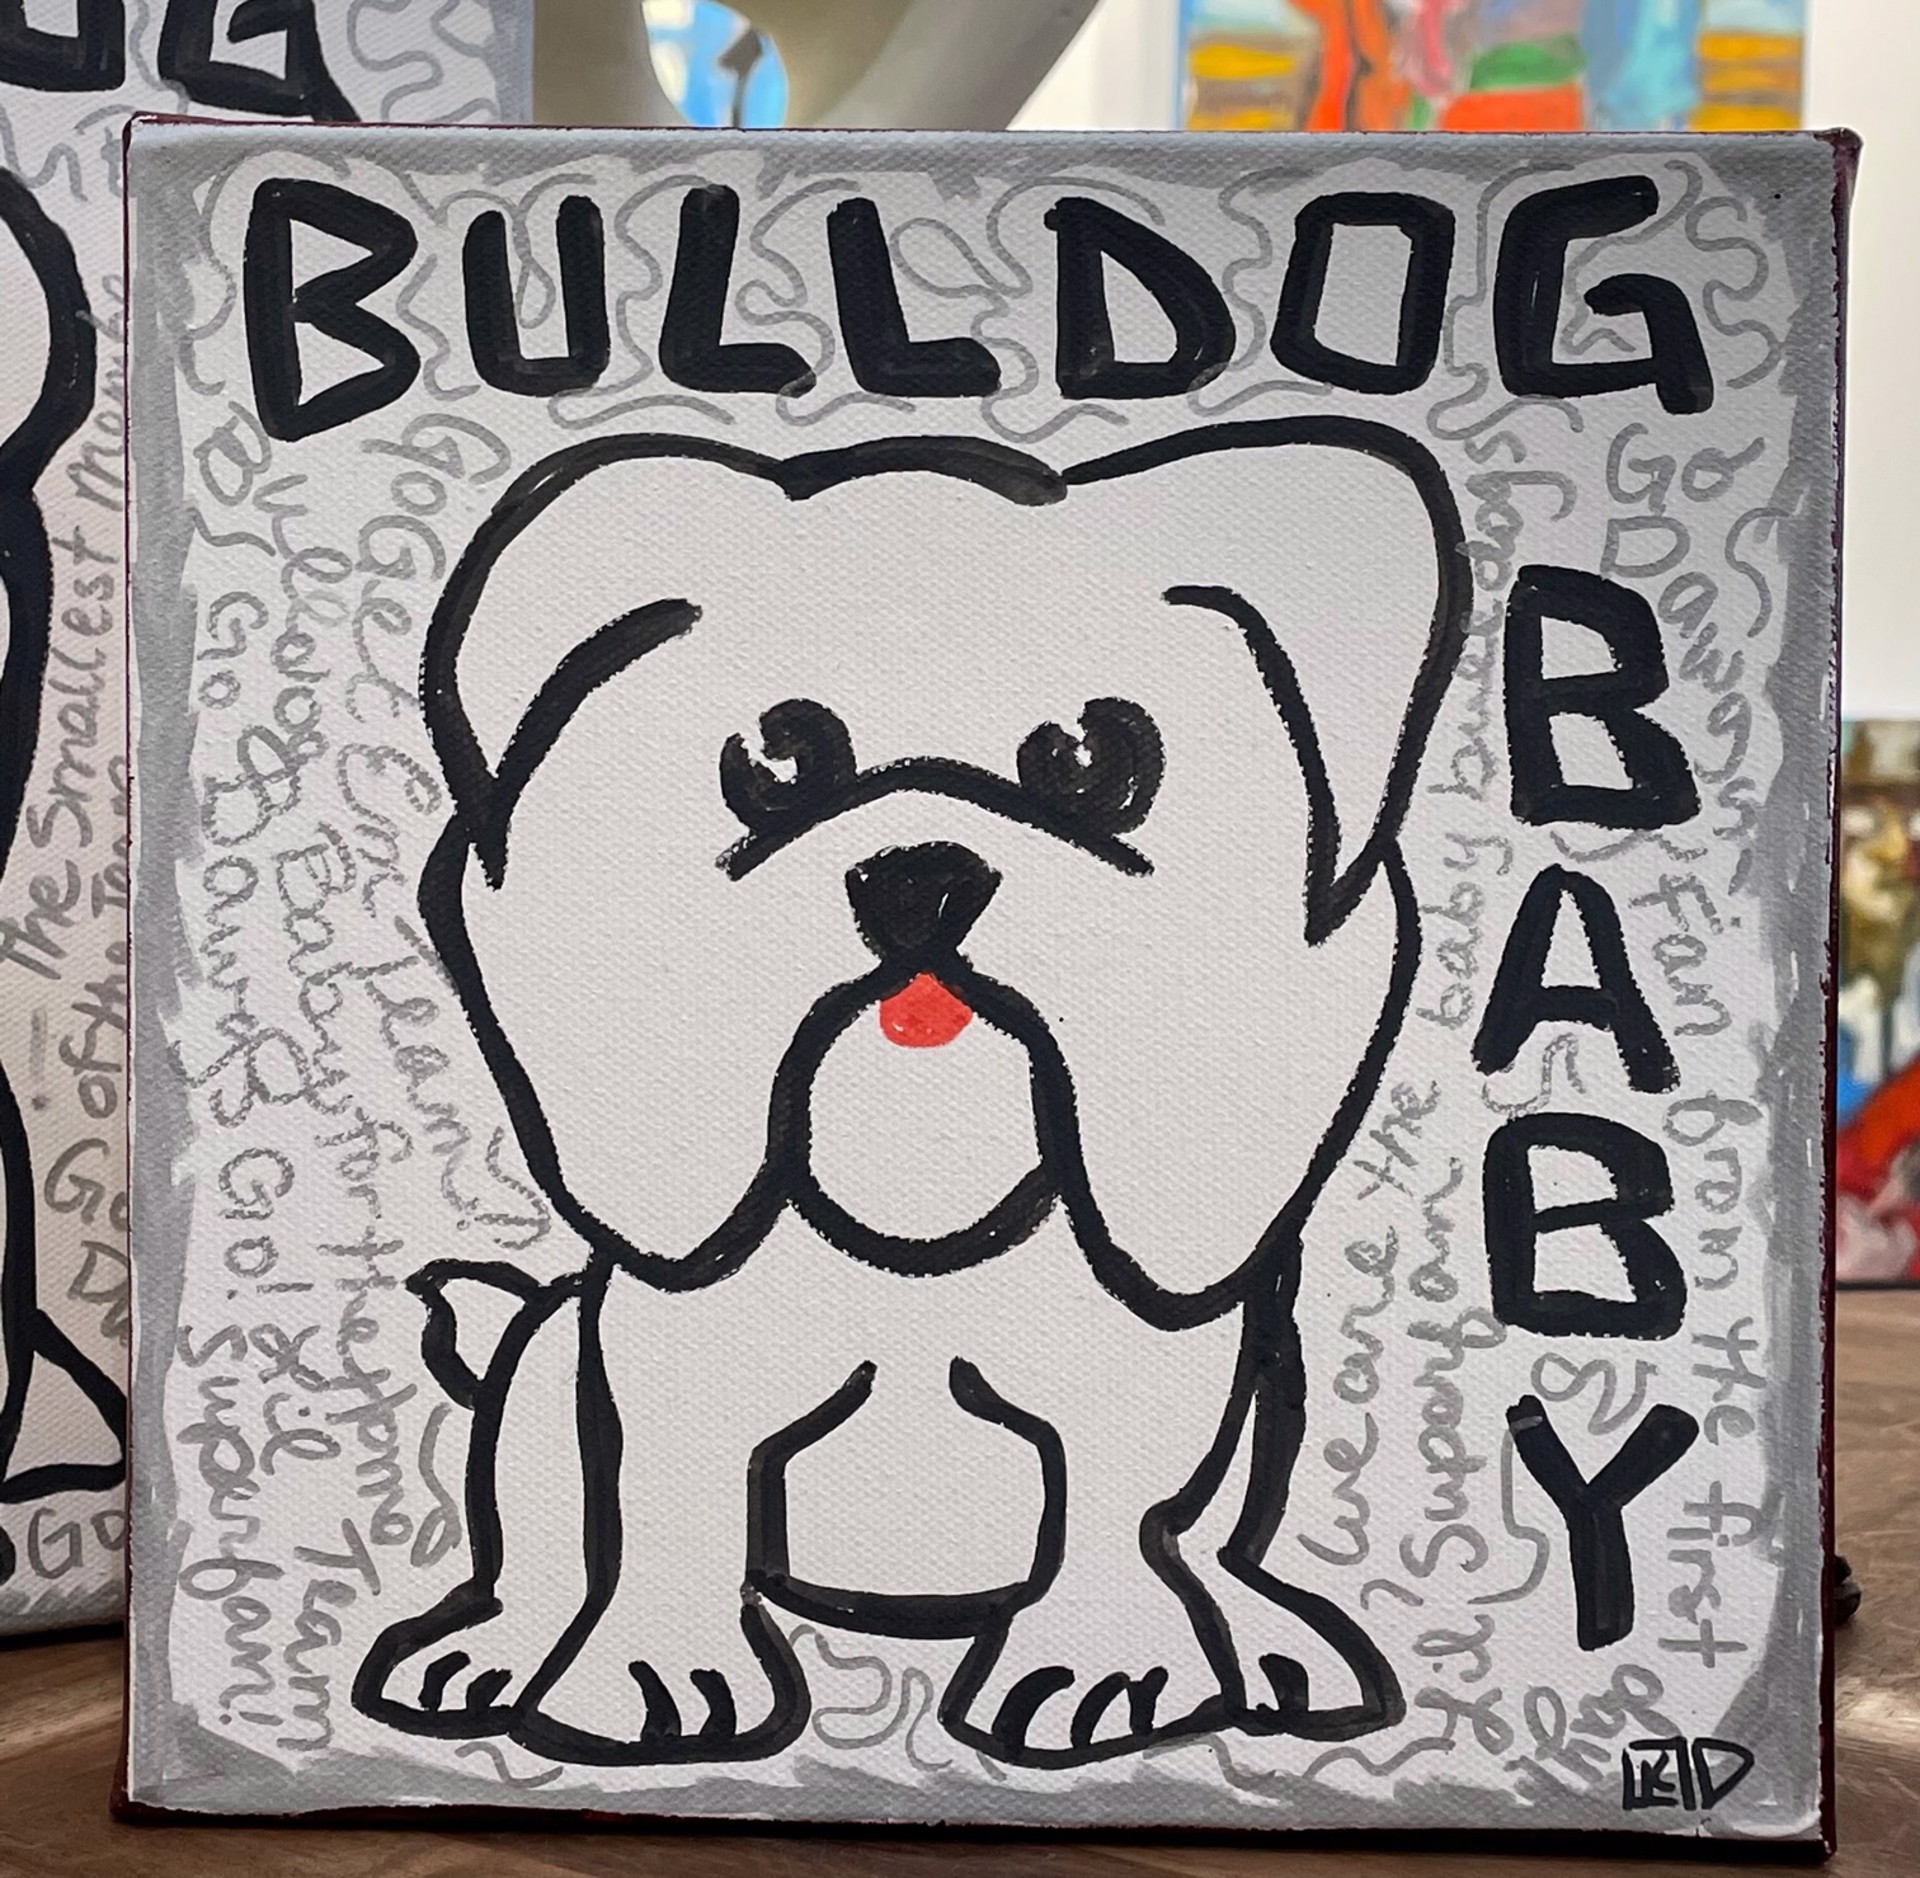 Baby Bulldog 1 by Pacesetter Merchandise